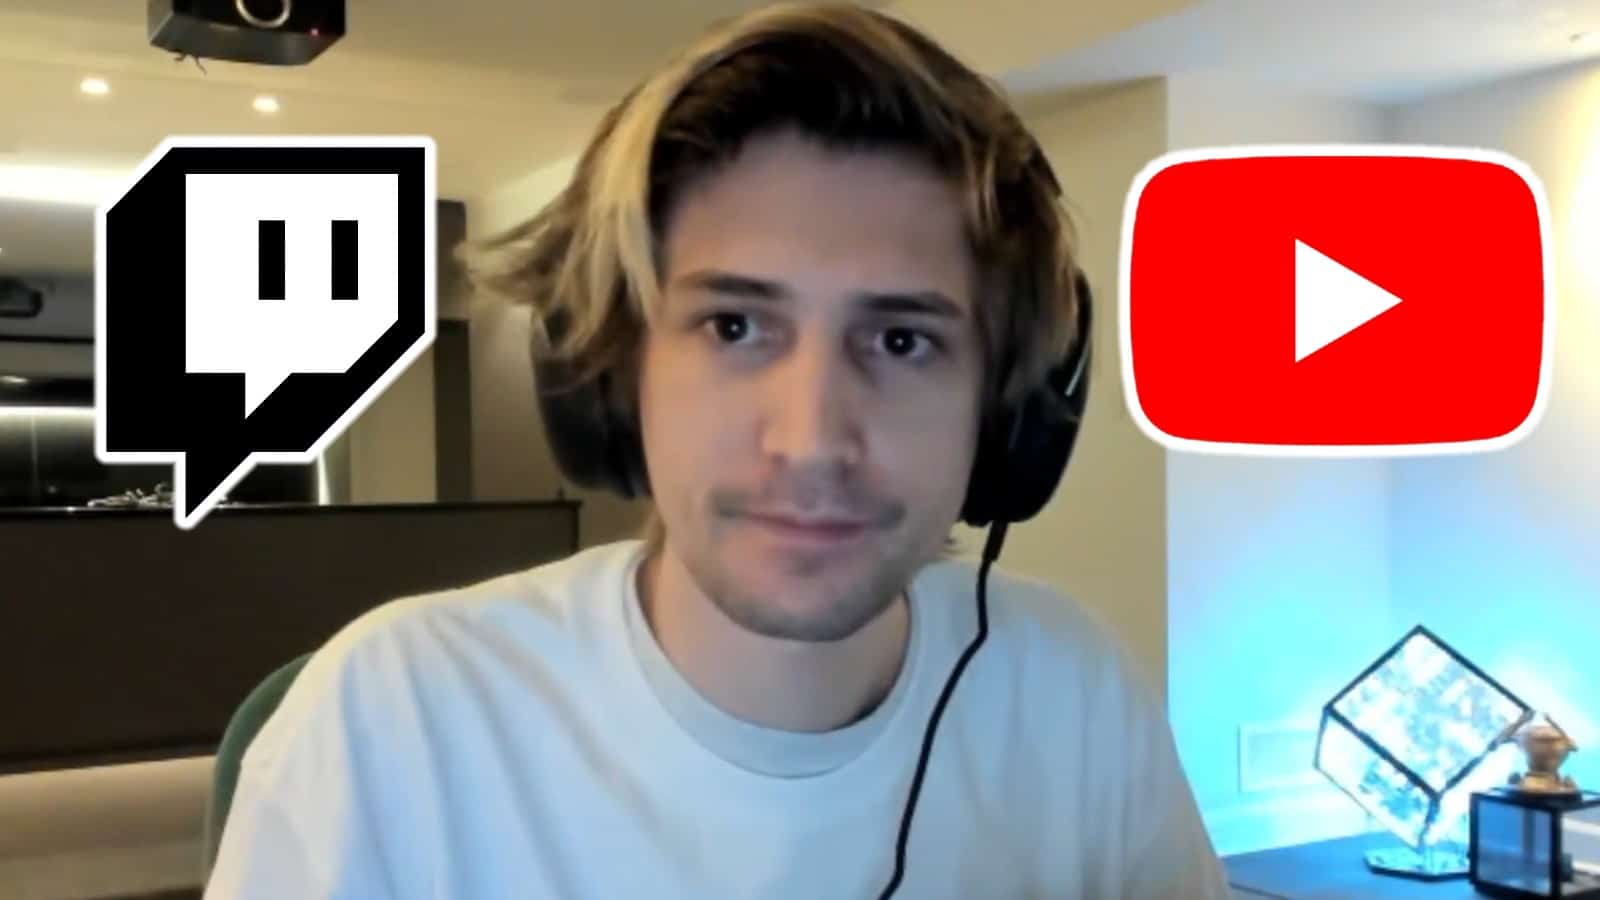 xQc streams on Twitch with Twitch and YouTube logo